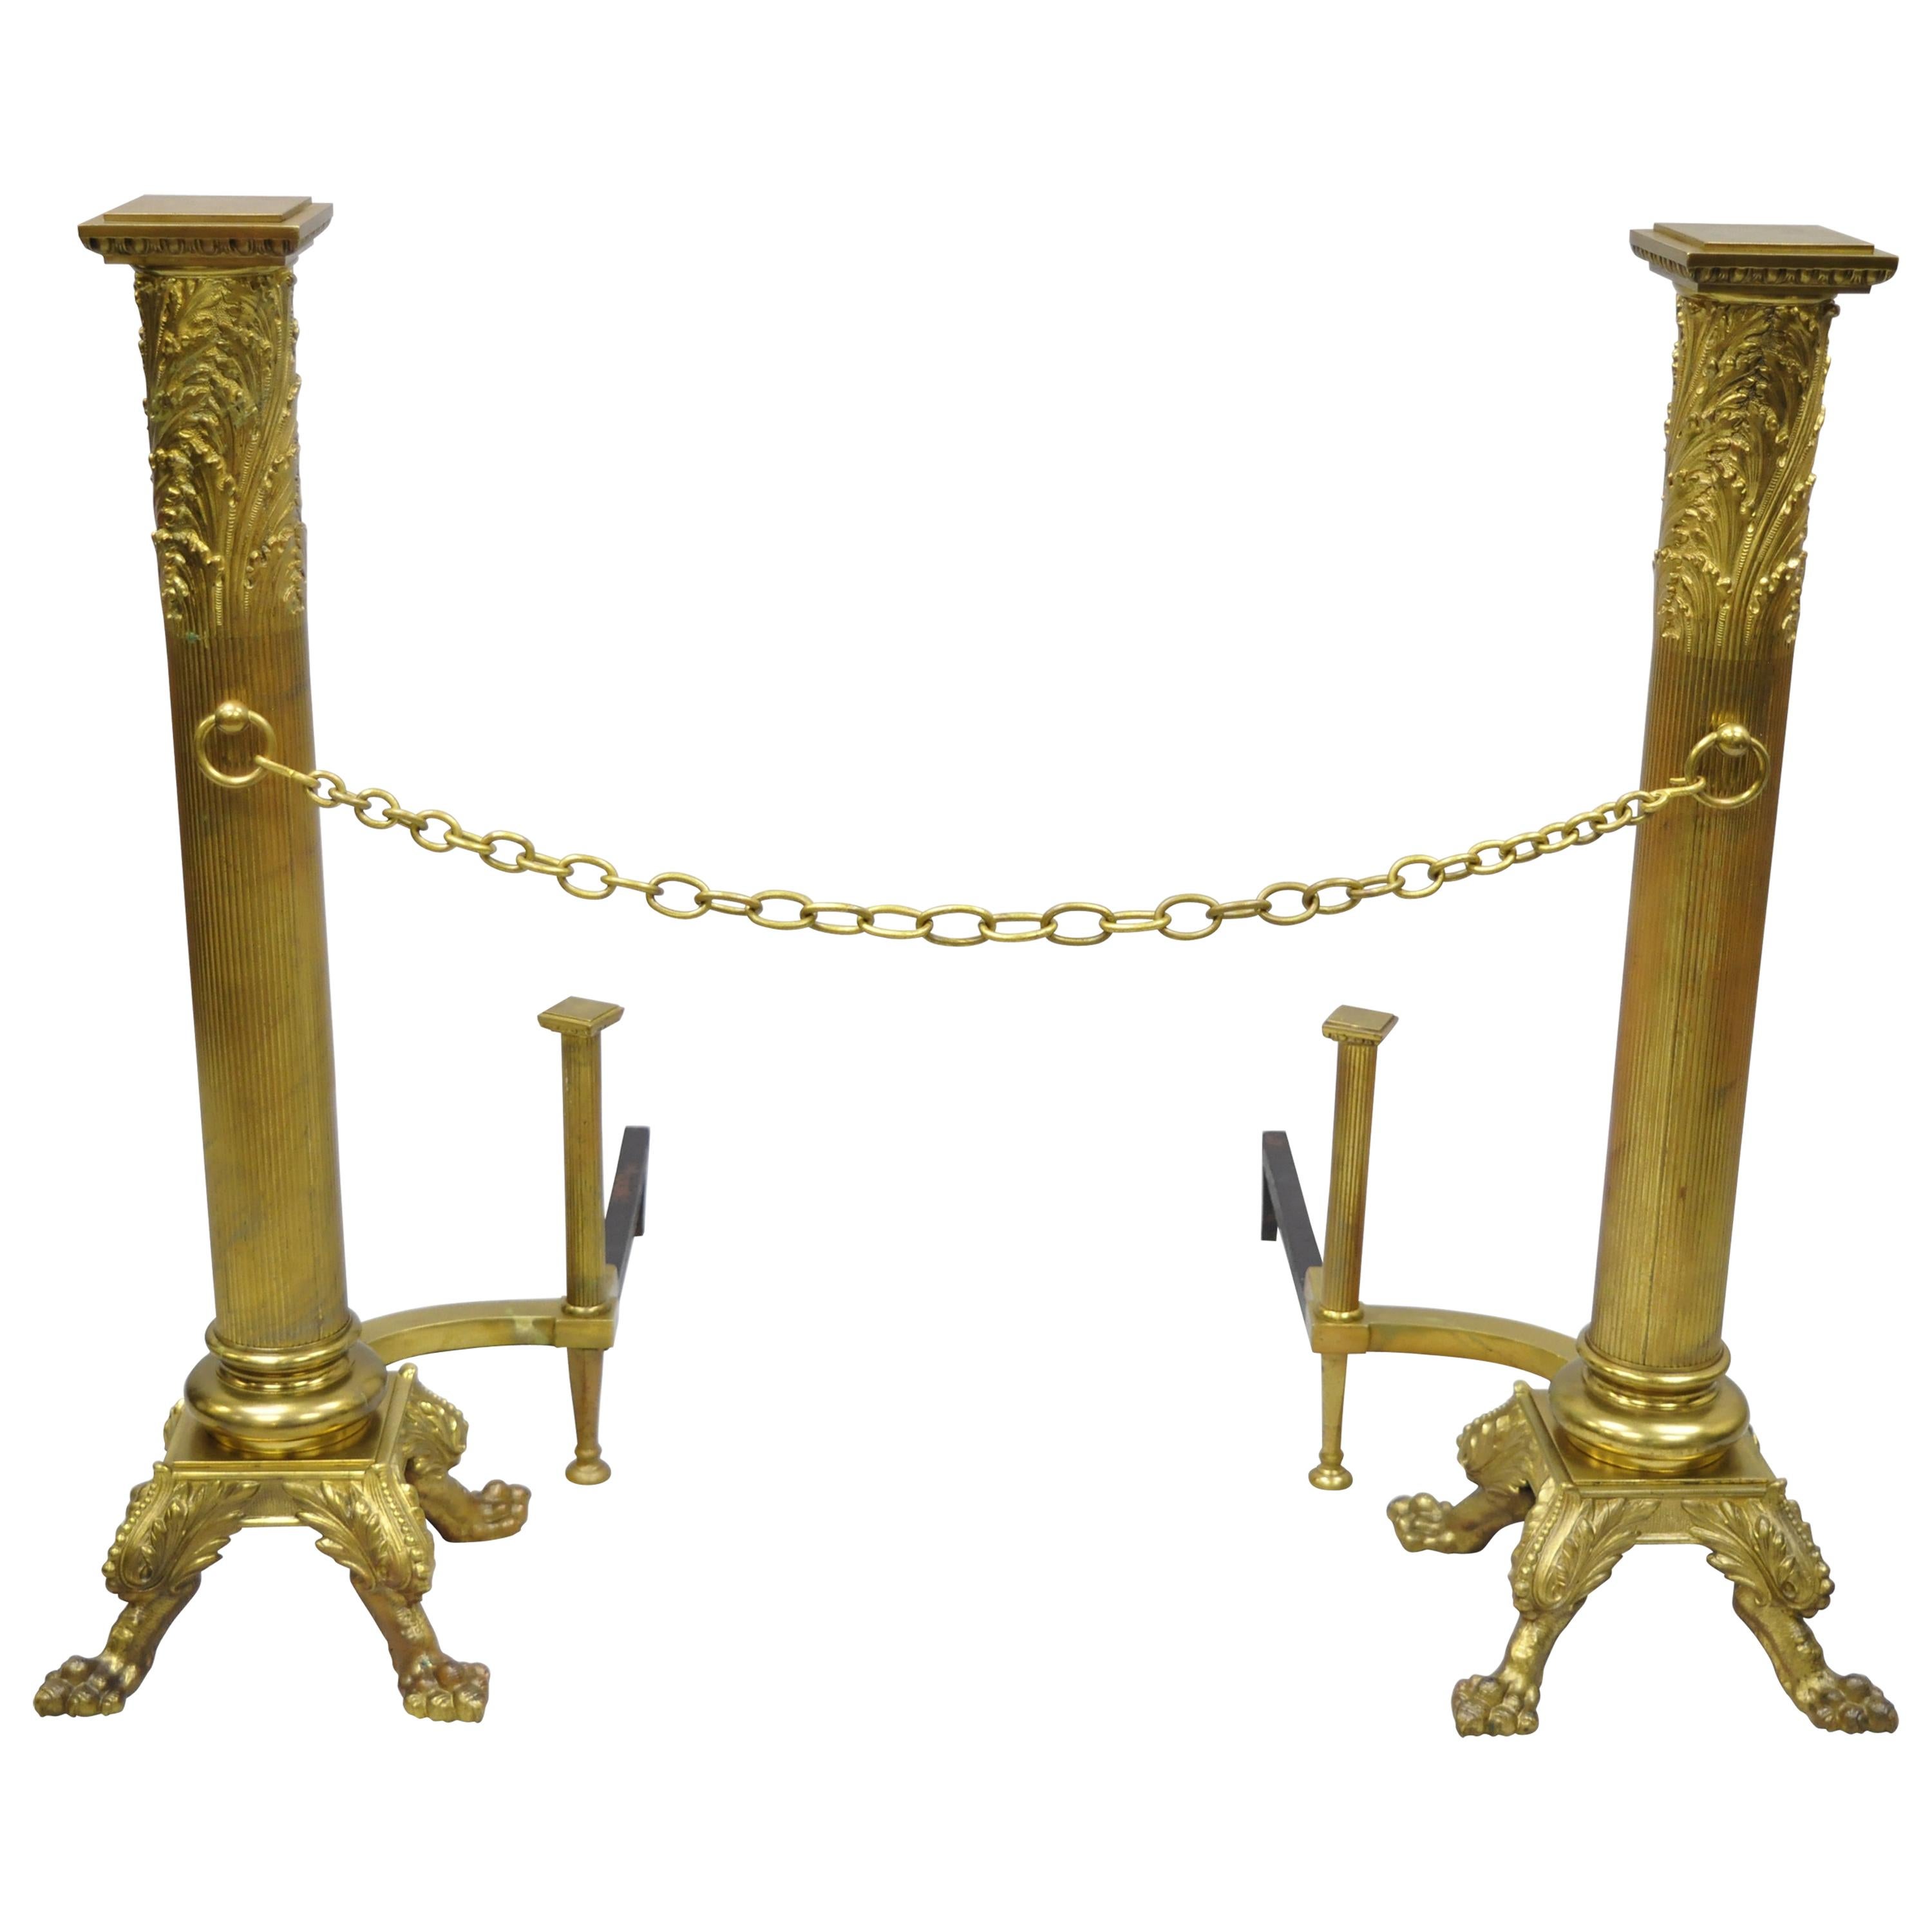 Large Pair of Bronze French Empire Paw Foot Column Fireplace Andirons